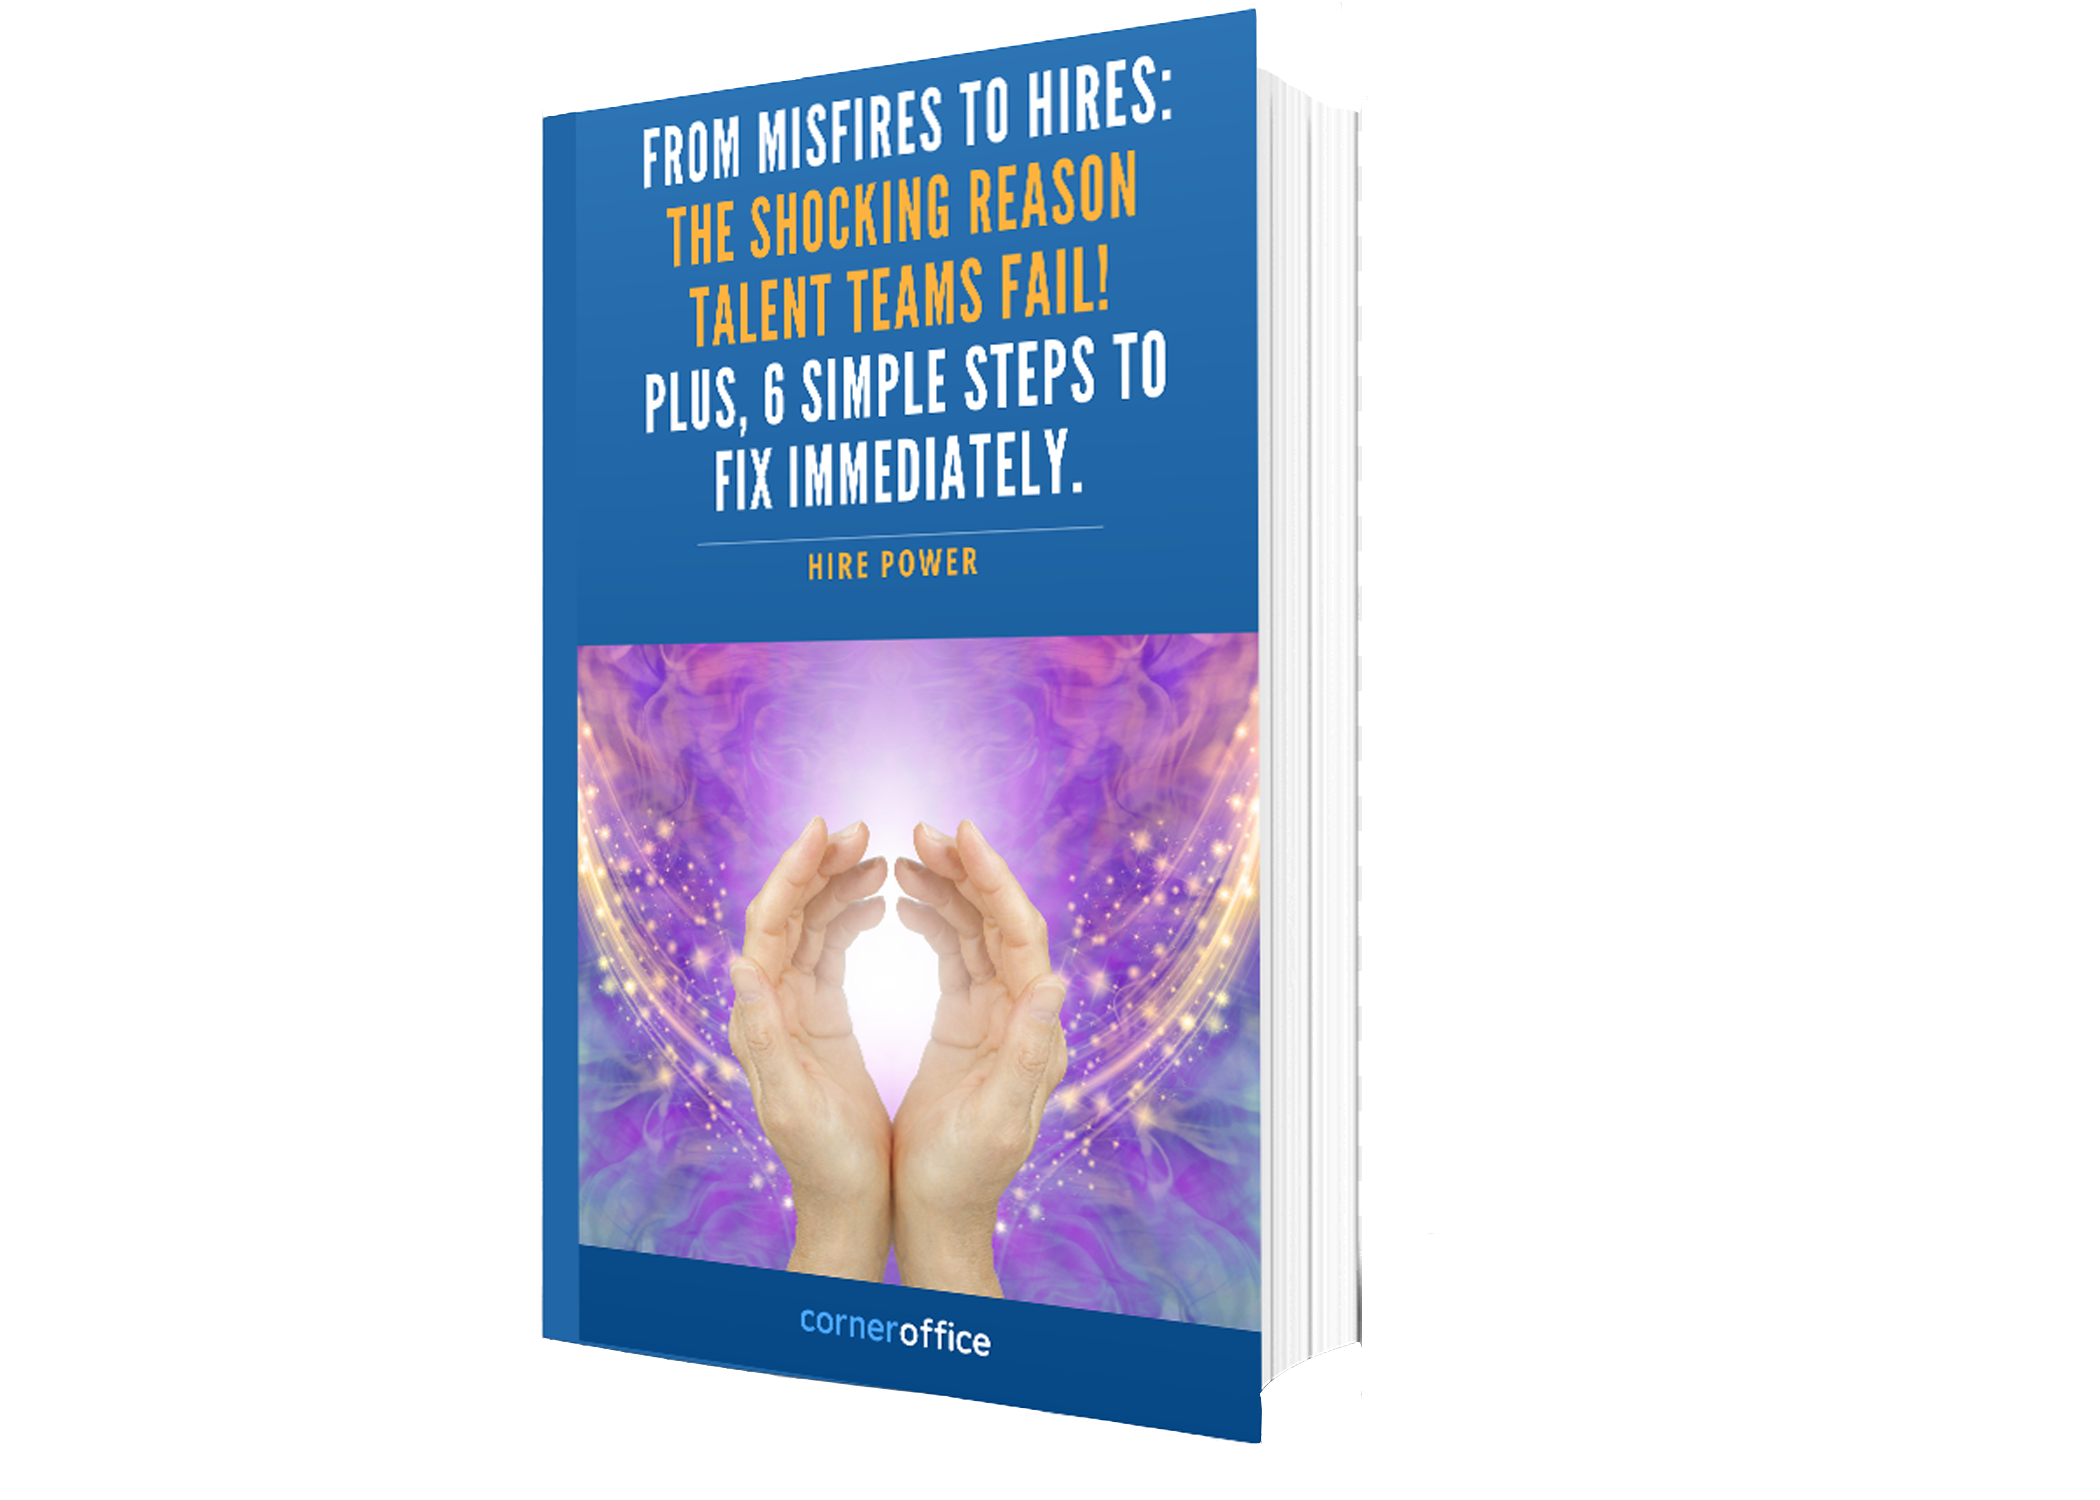 Download FREE eBook! From Misfires to Hires